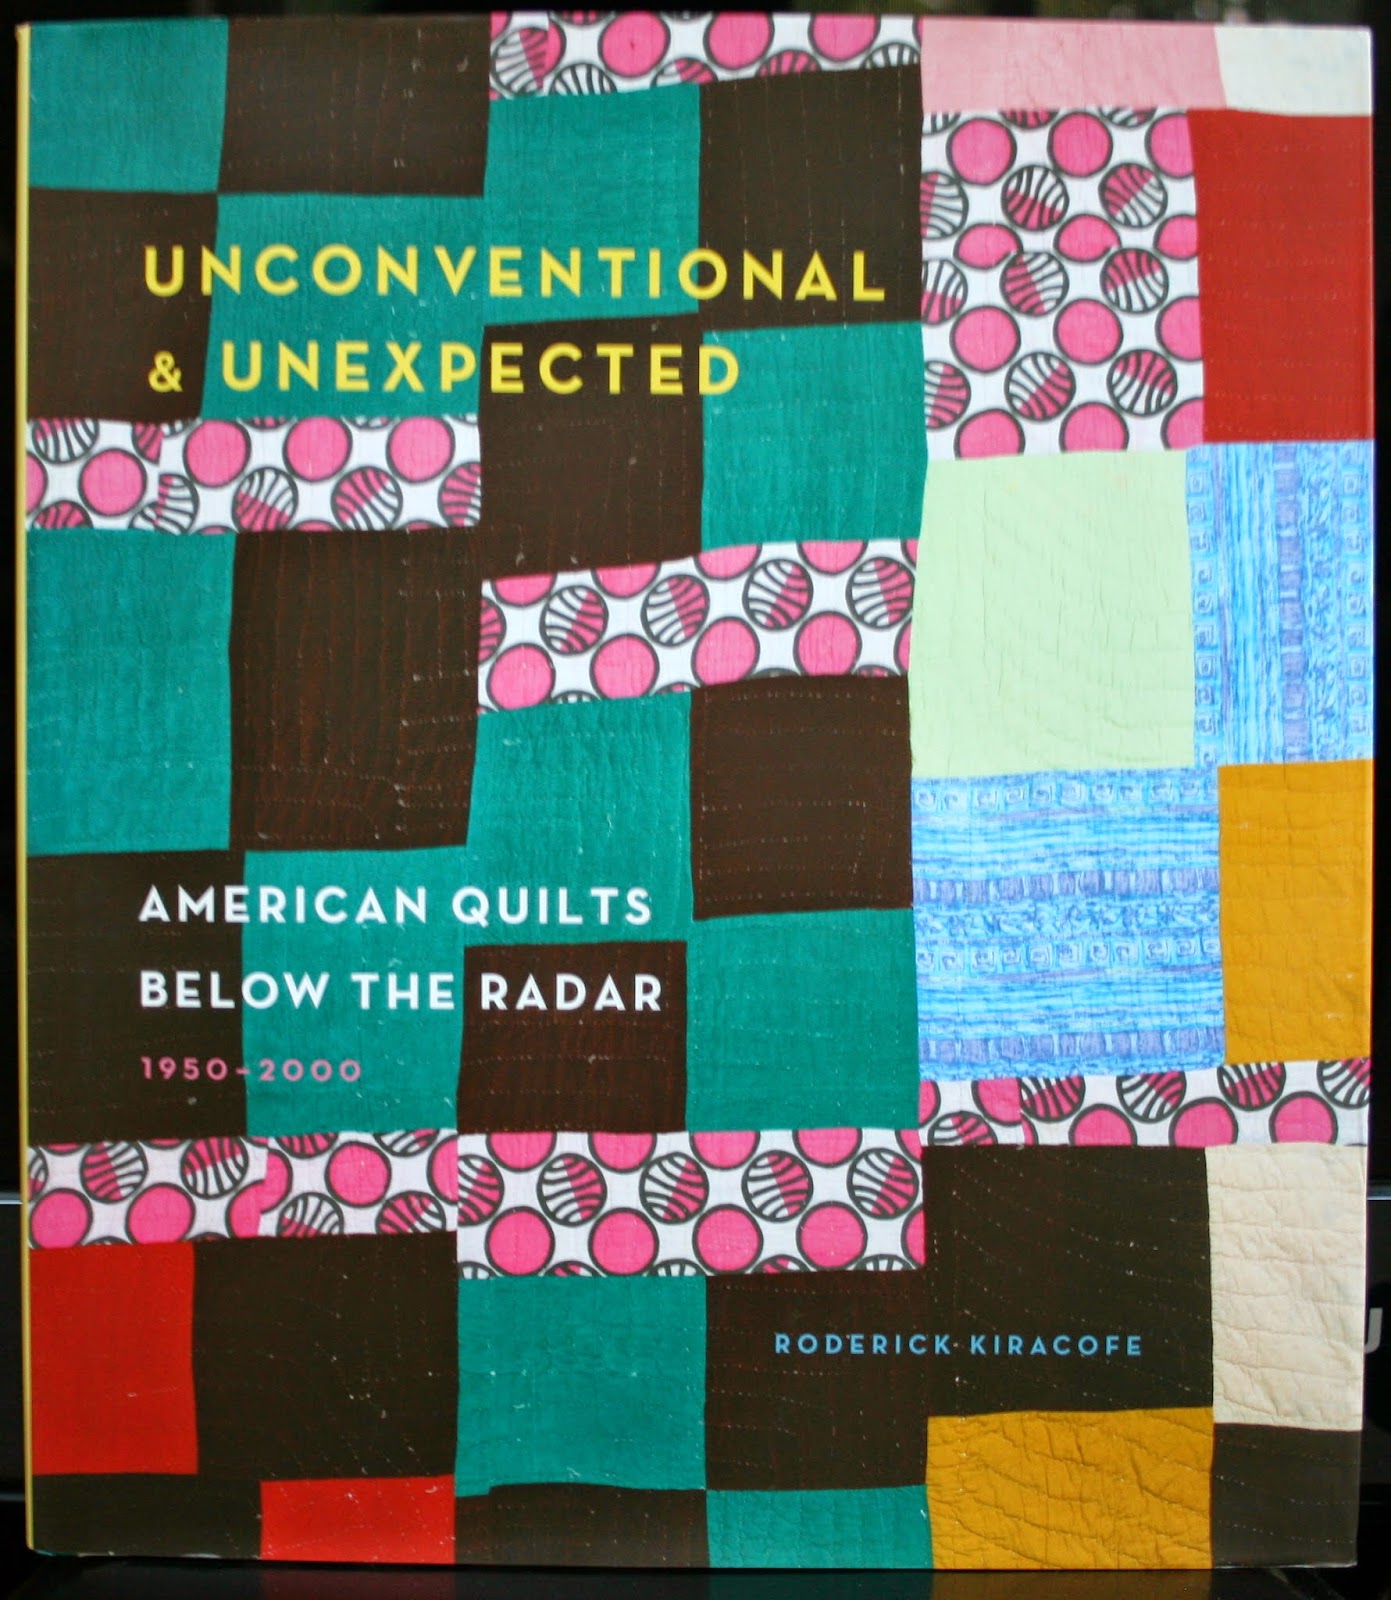 http://www.amazon.com/Unconventional-Unexpected-American-Quilts-1950-2000/dp/1617691232/ref=la_B000APF6UY_1_1?s=books&ie=UTF8&qid=1410871188&sr=1-1